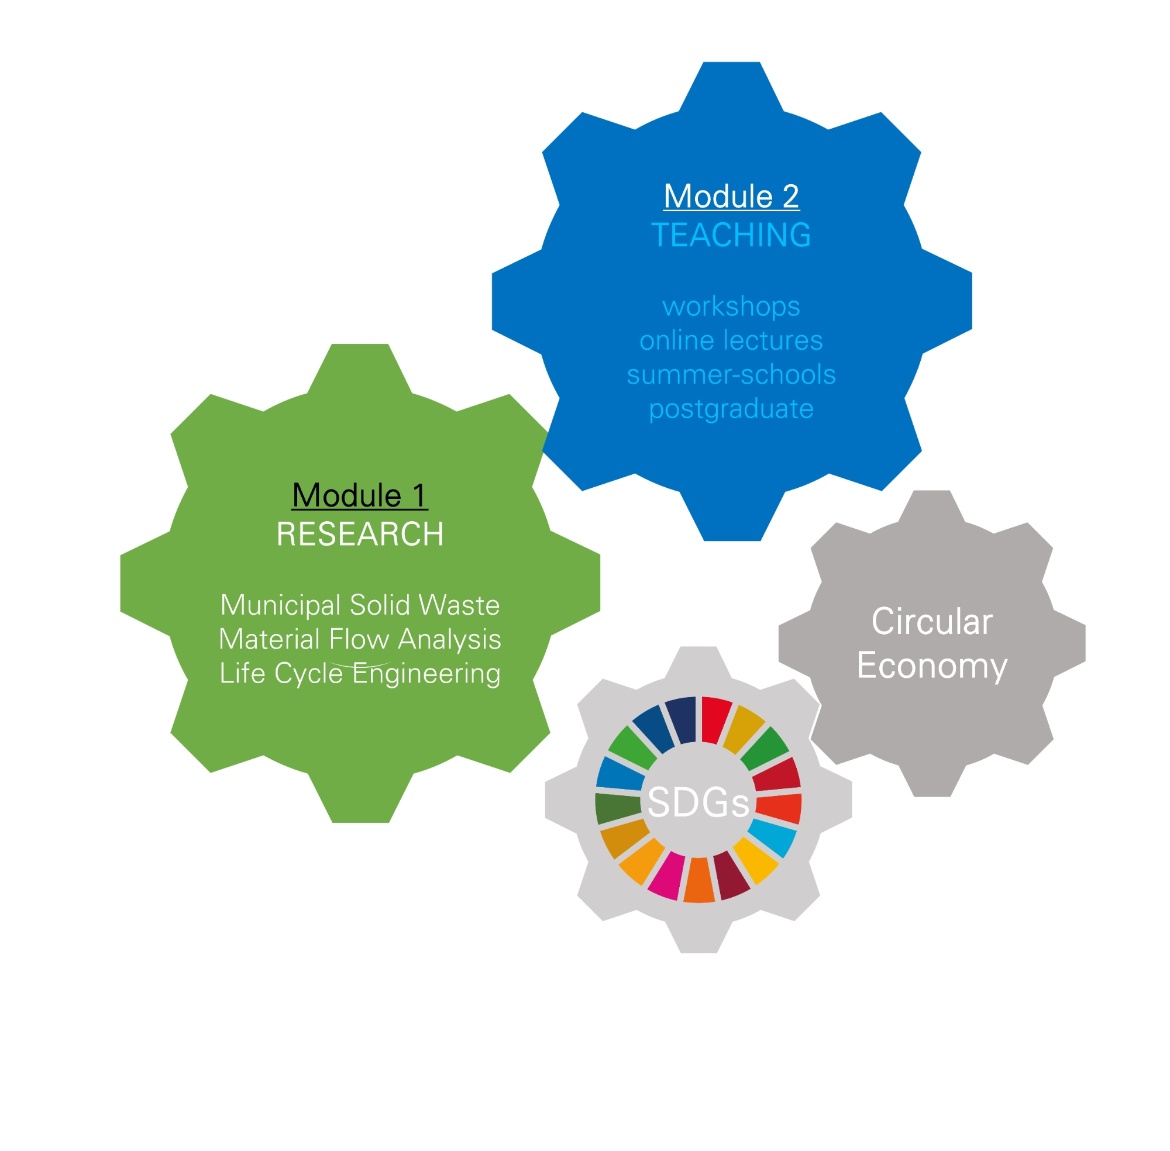 interlocking gears representation of the Modules 1 and 2 as well as circular economy and the UN's Sustainable Development Goals which are supposed to be archieved through the SuCCESS 24 Project.